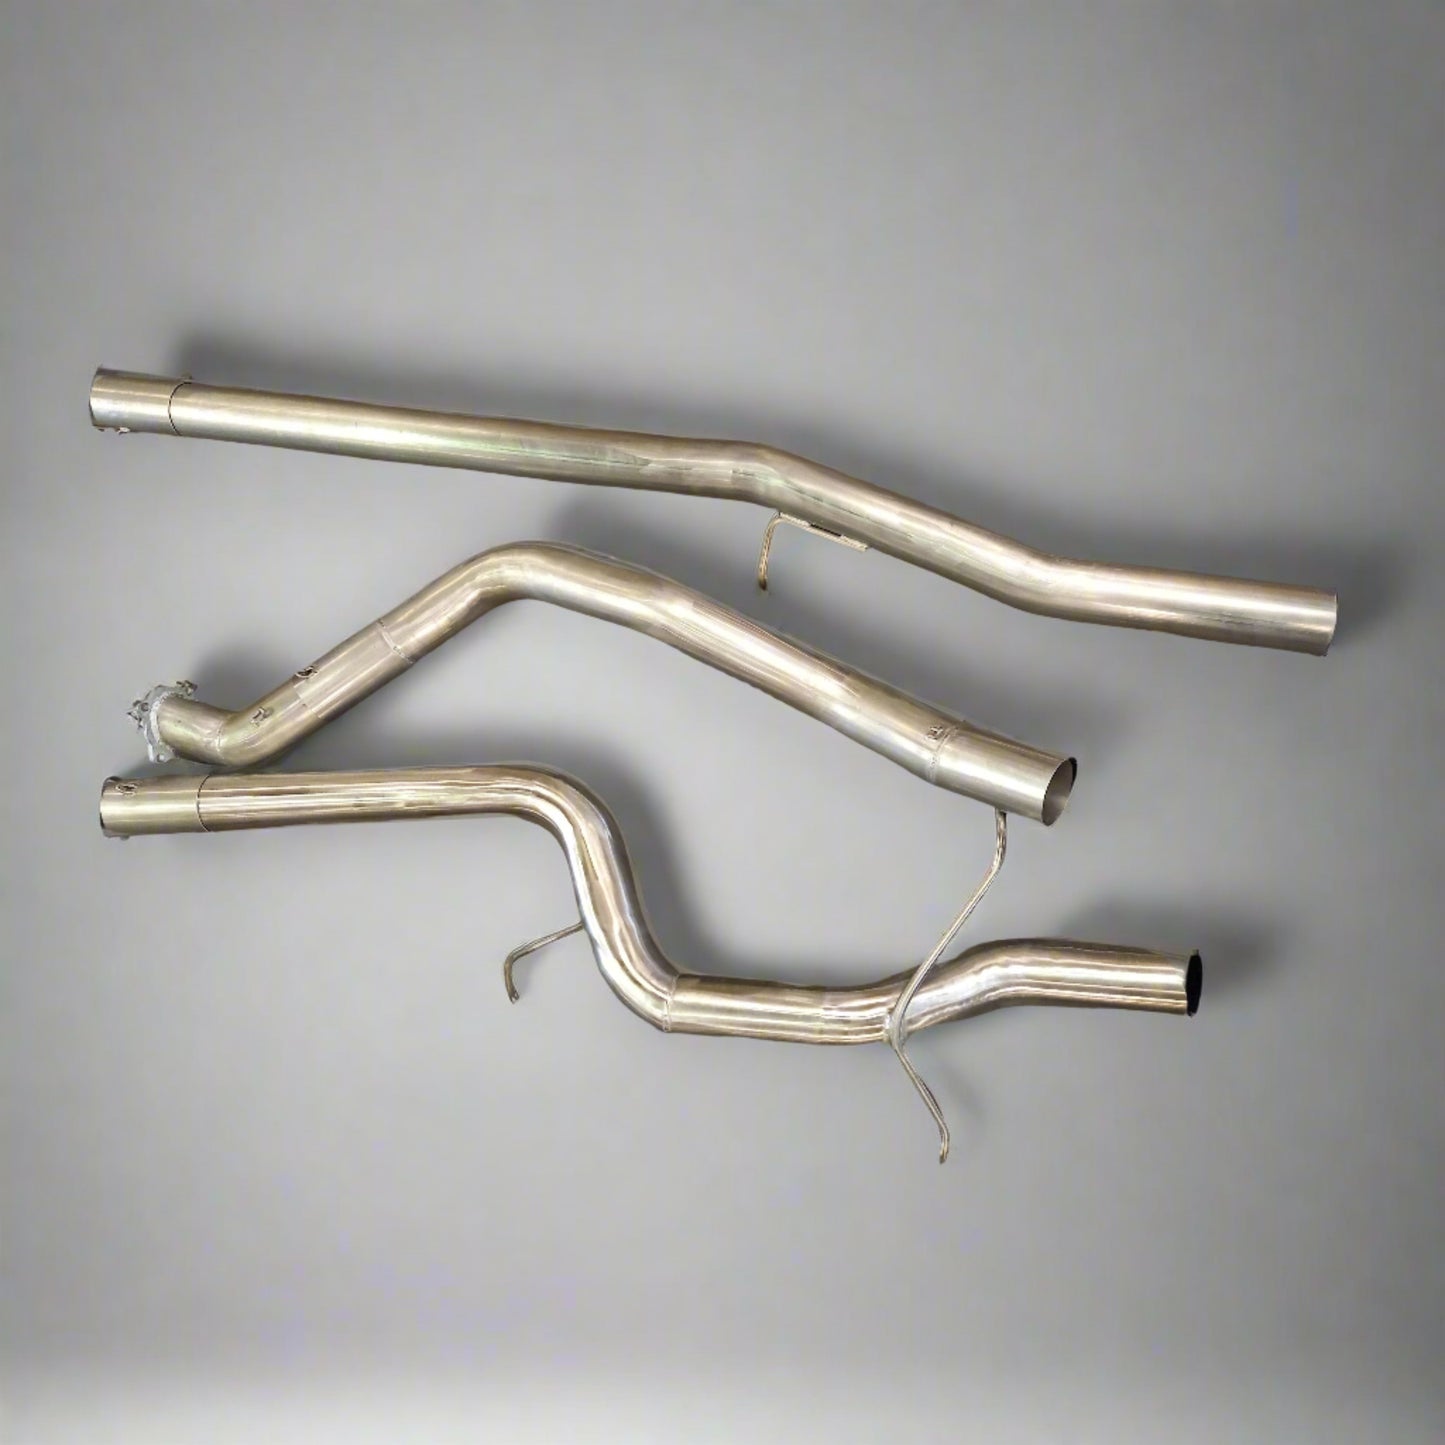 Impreza Classic Replica Group A Rally Spec Unsilenced Turbo Back Exhaust with Slip Joints